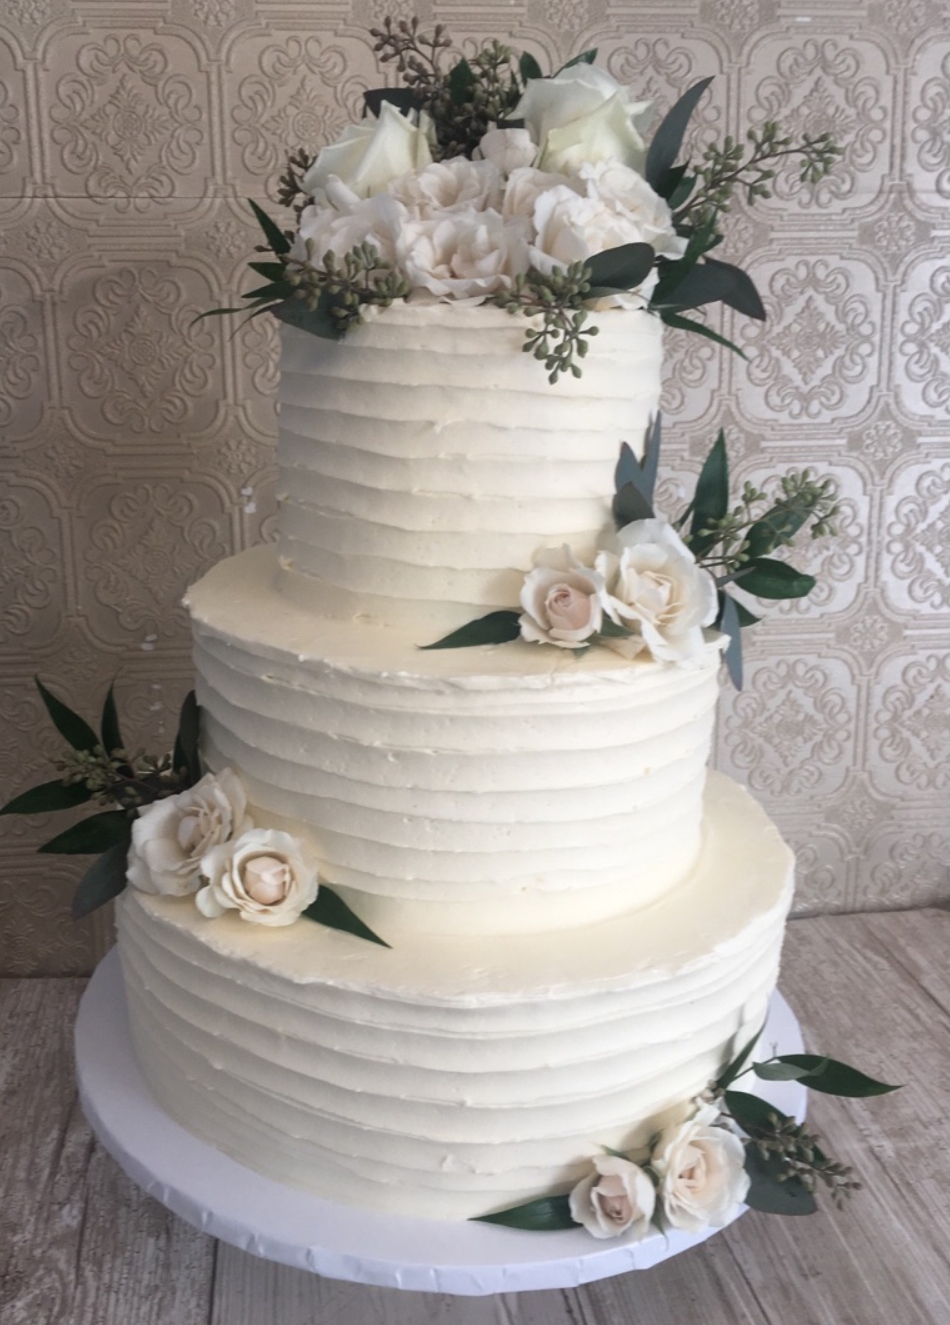 wedding flowers ivory roses & ribbons with greenery cake 3 tier topper 